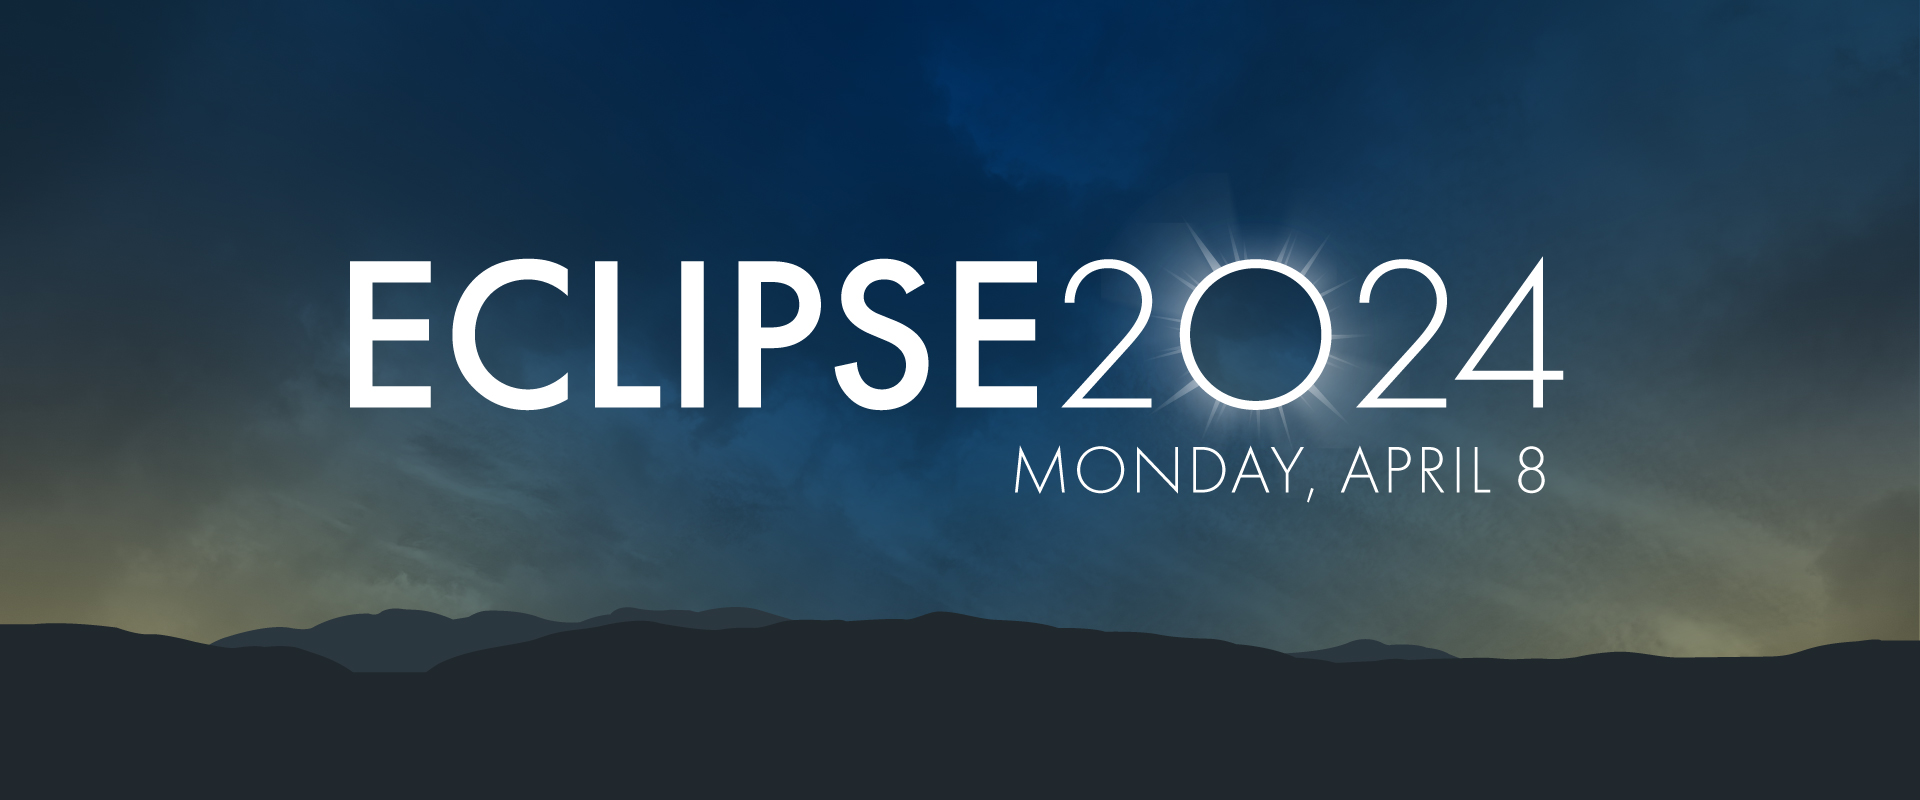 Graphic of a night sky over a mountain range with white text that reads "Eclipse 2024 Monday, April 8"